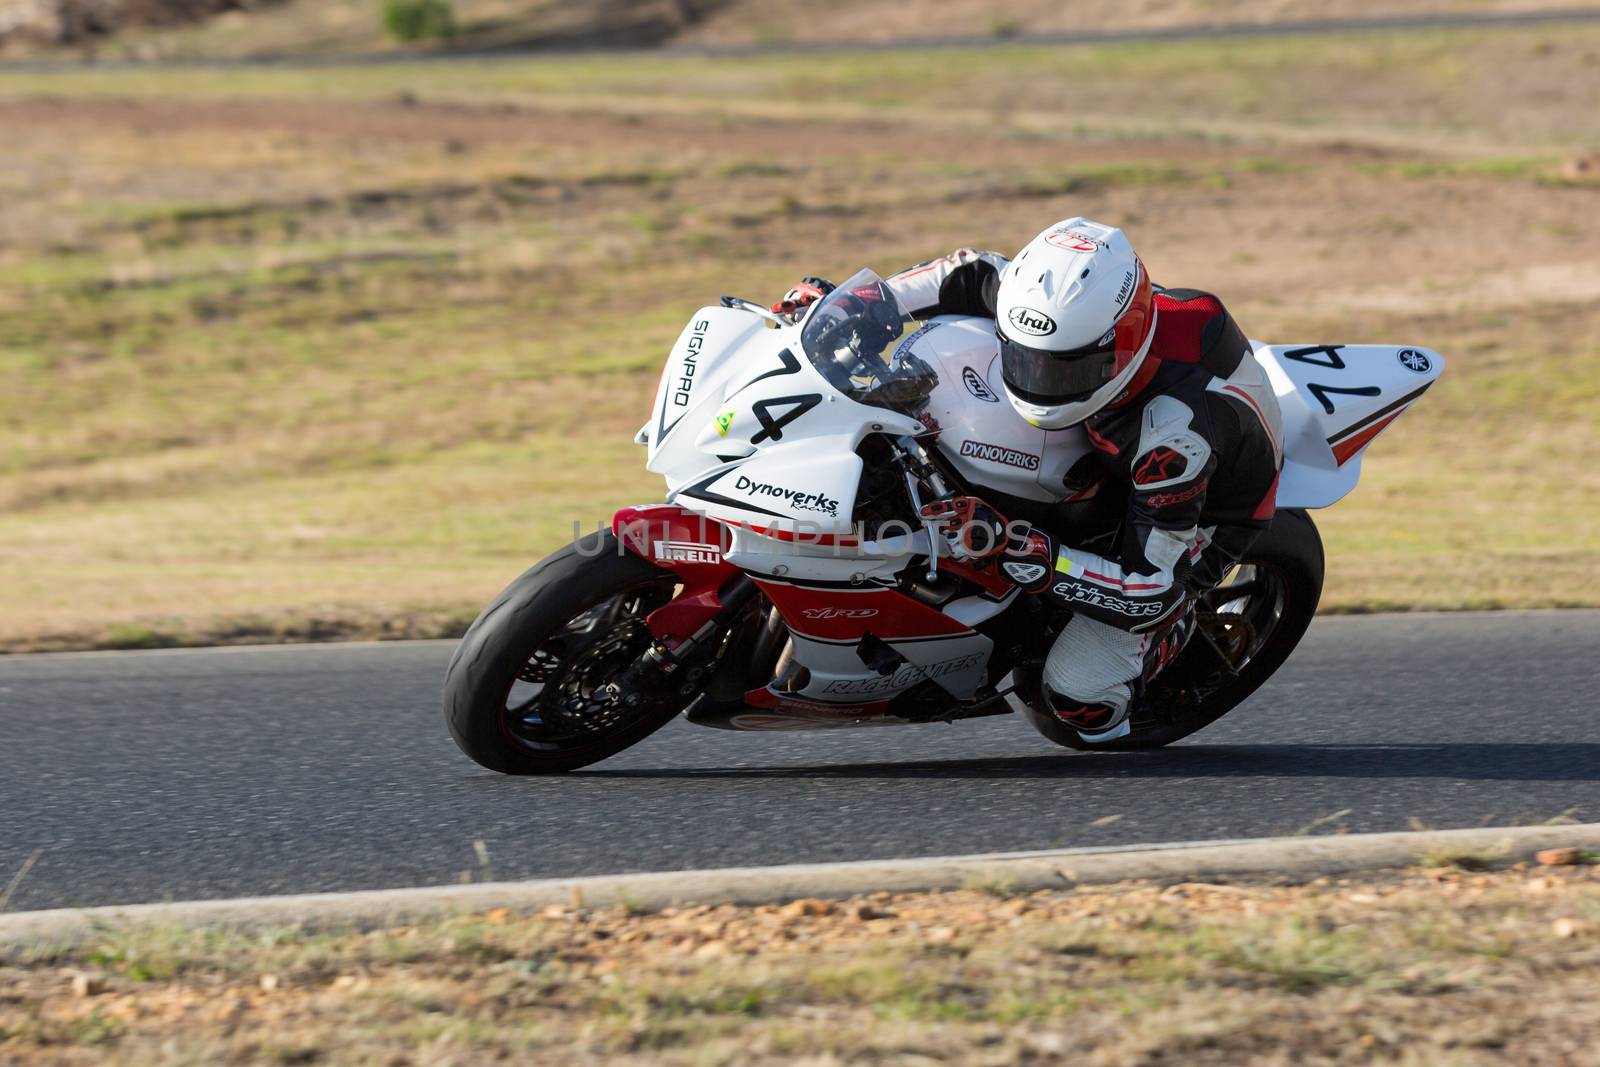 BROADFORD, VICTORIA/AUSTRALIA - MARCH 13: A mix of road and race bikes tussle against each other at The Broadford Motorcycle Complex.